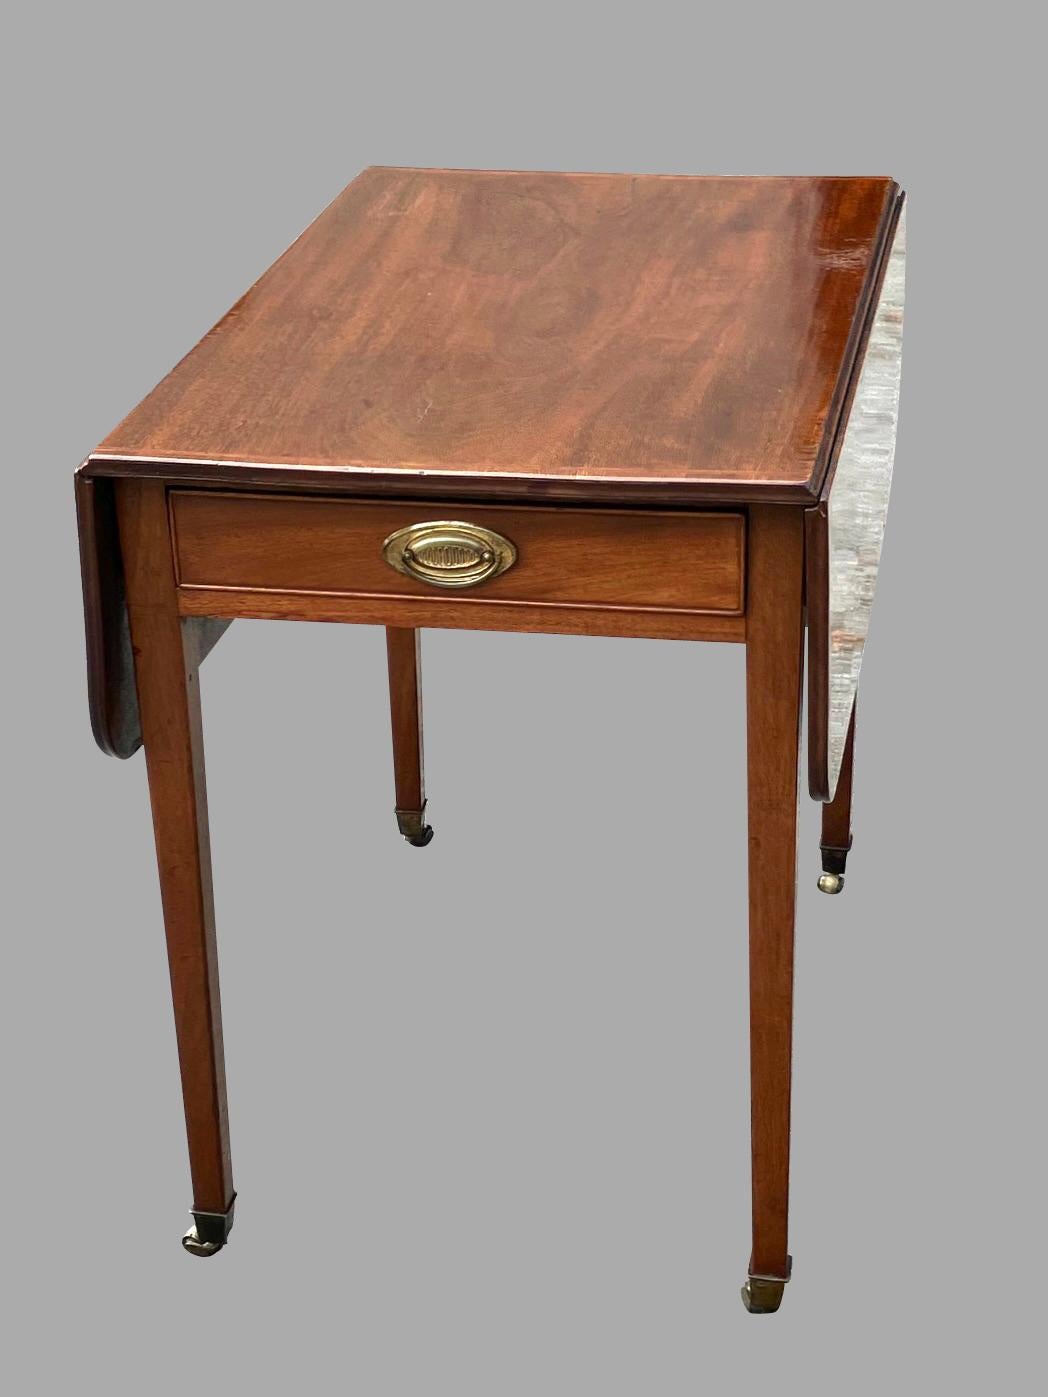 A rectangular English mahogany pembroke table of typical form, the top with a finely inlaid border above a central drawer, with 2 drop leaf sides, supported on square tapered legs ending in casters. French polished finish. Circa 1790.